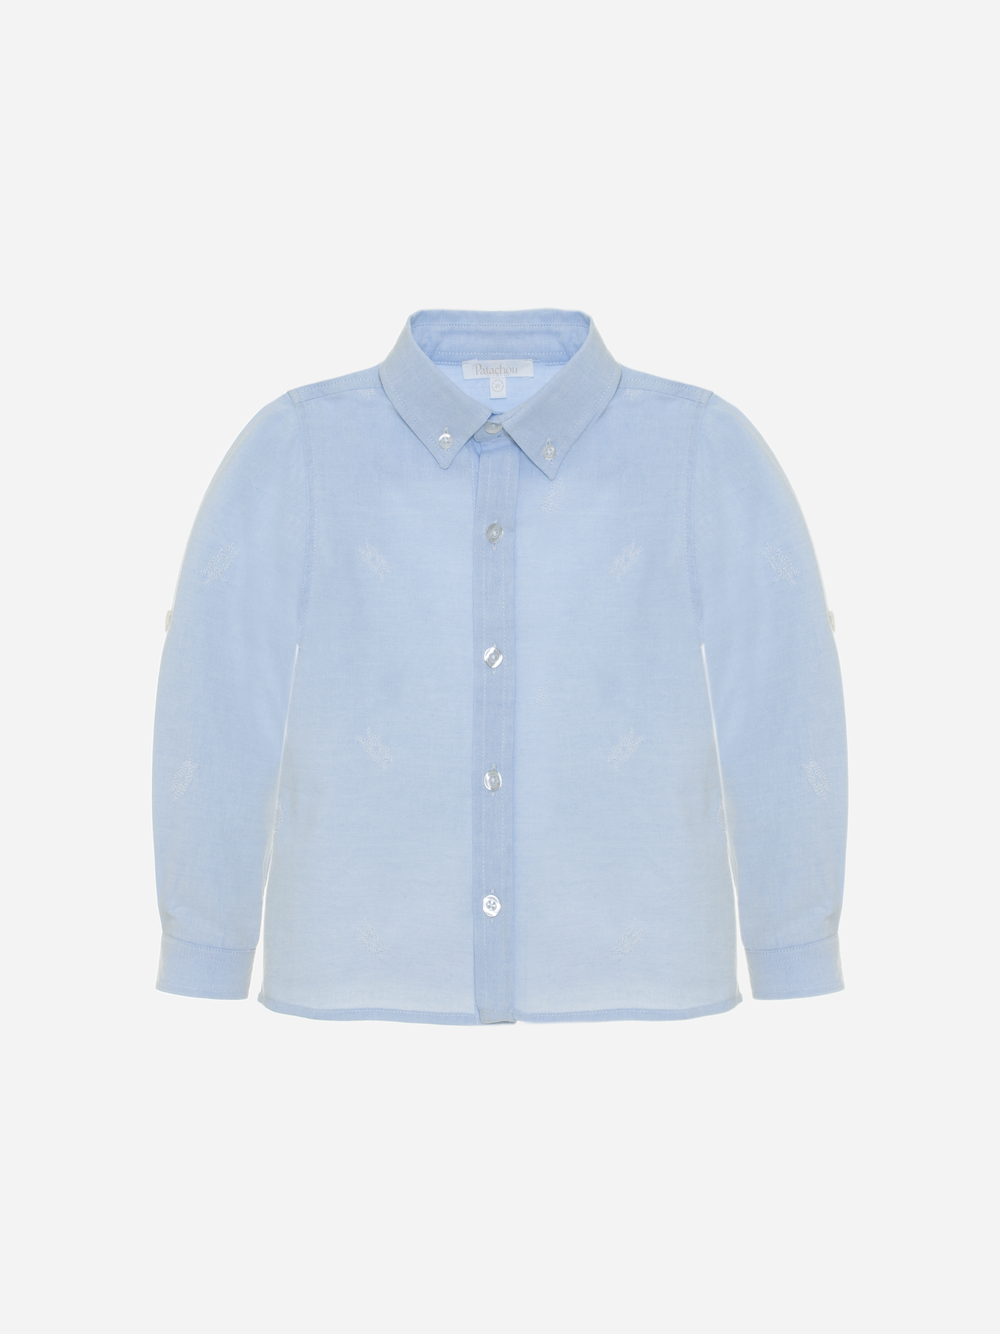 Blue rope embroidered shirt